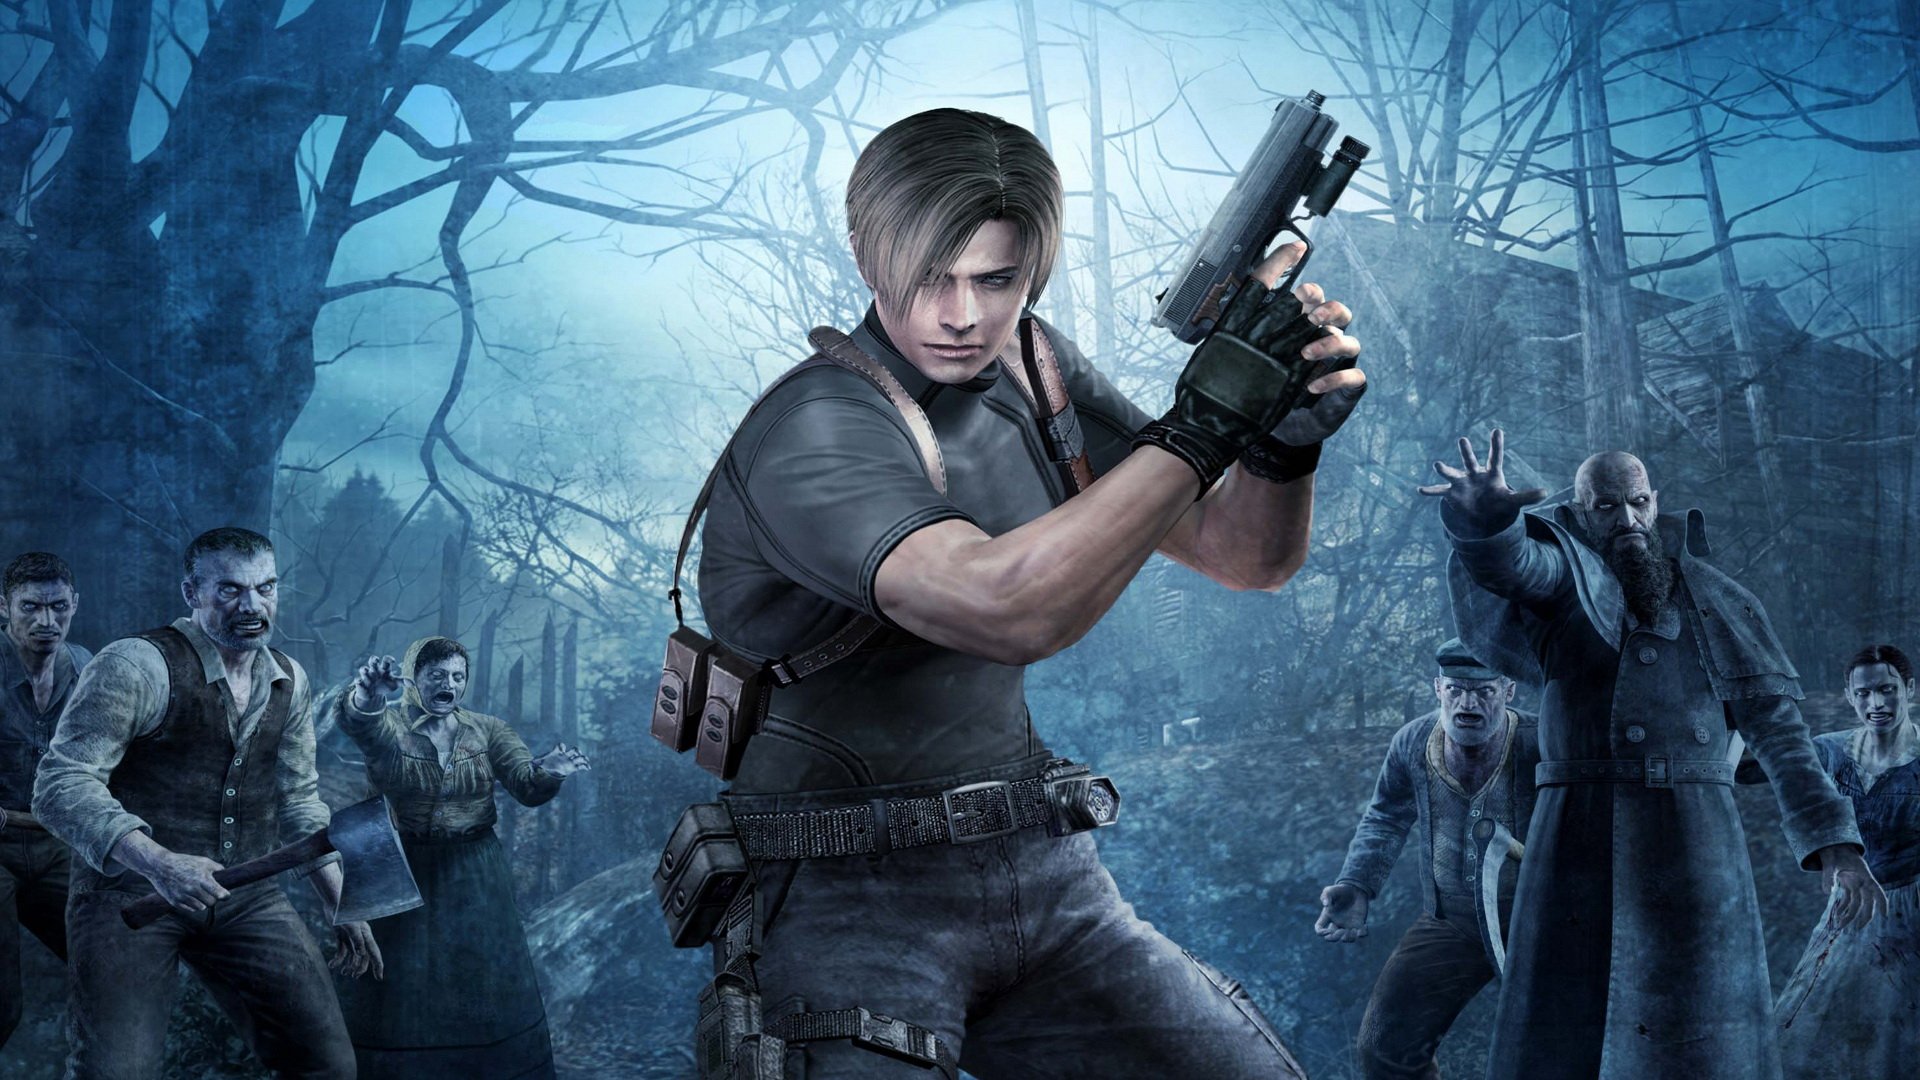 Resident Evil 4 Leon Kennedy Video Games Video Game Characters Gun Trees Men Beard Axes Weapon Video 1920x1080